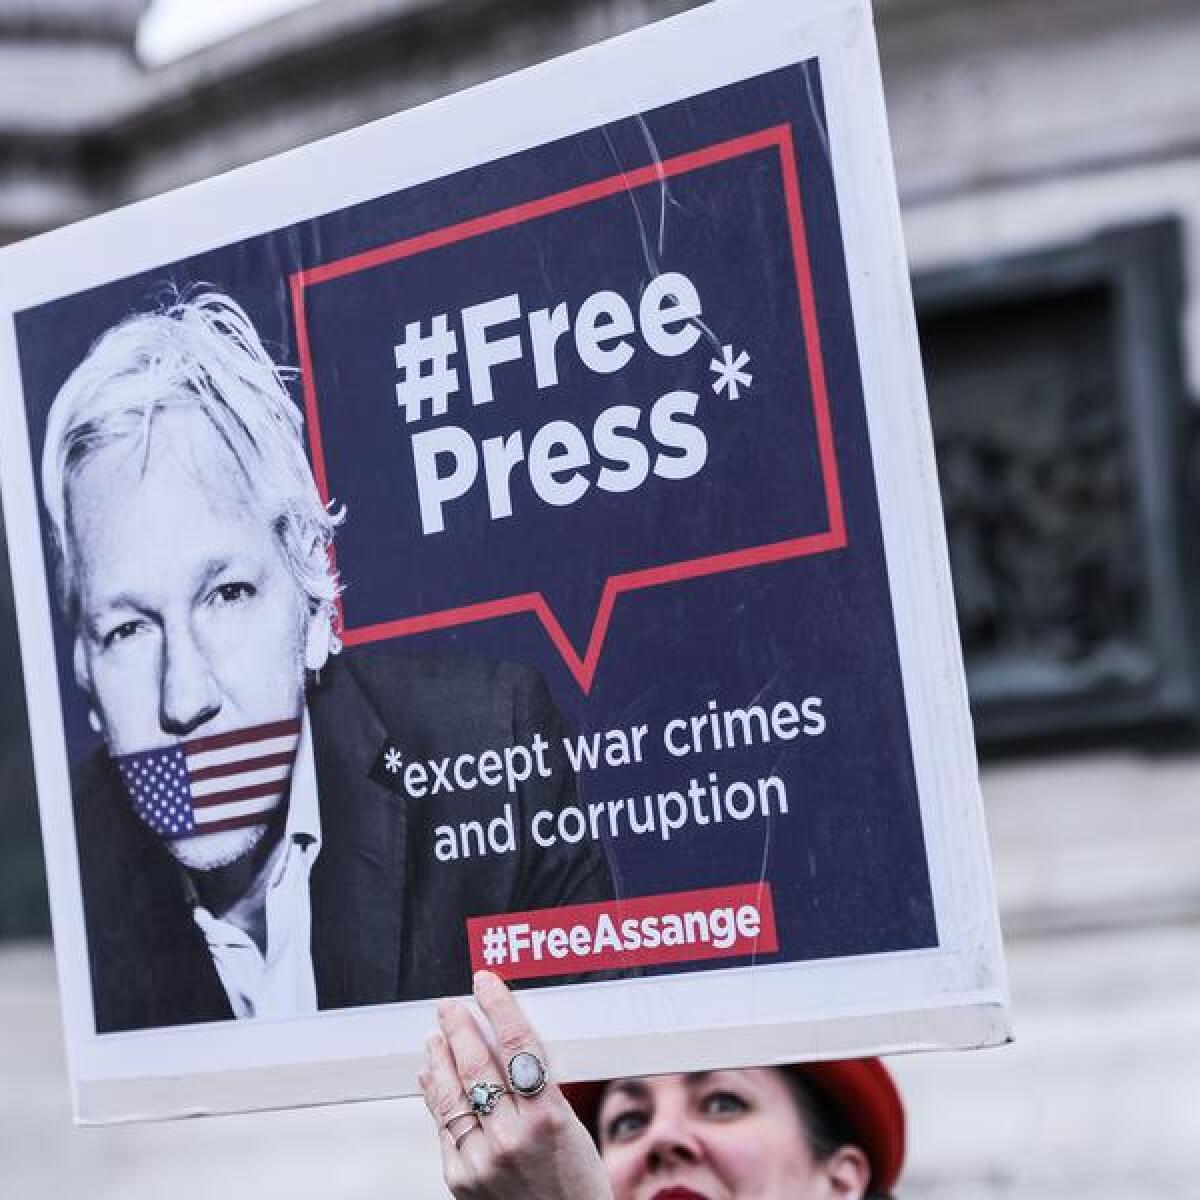 A protester supporting Julian Assange